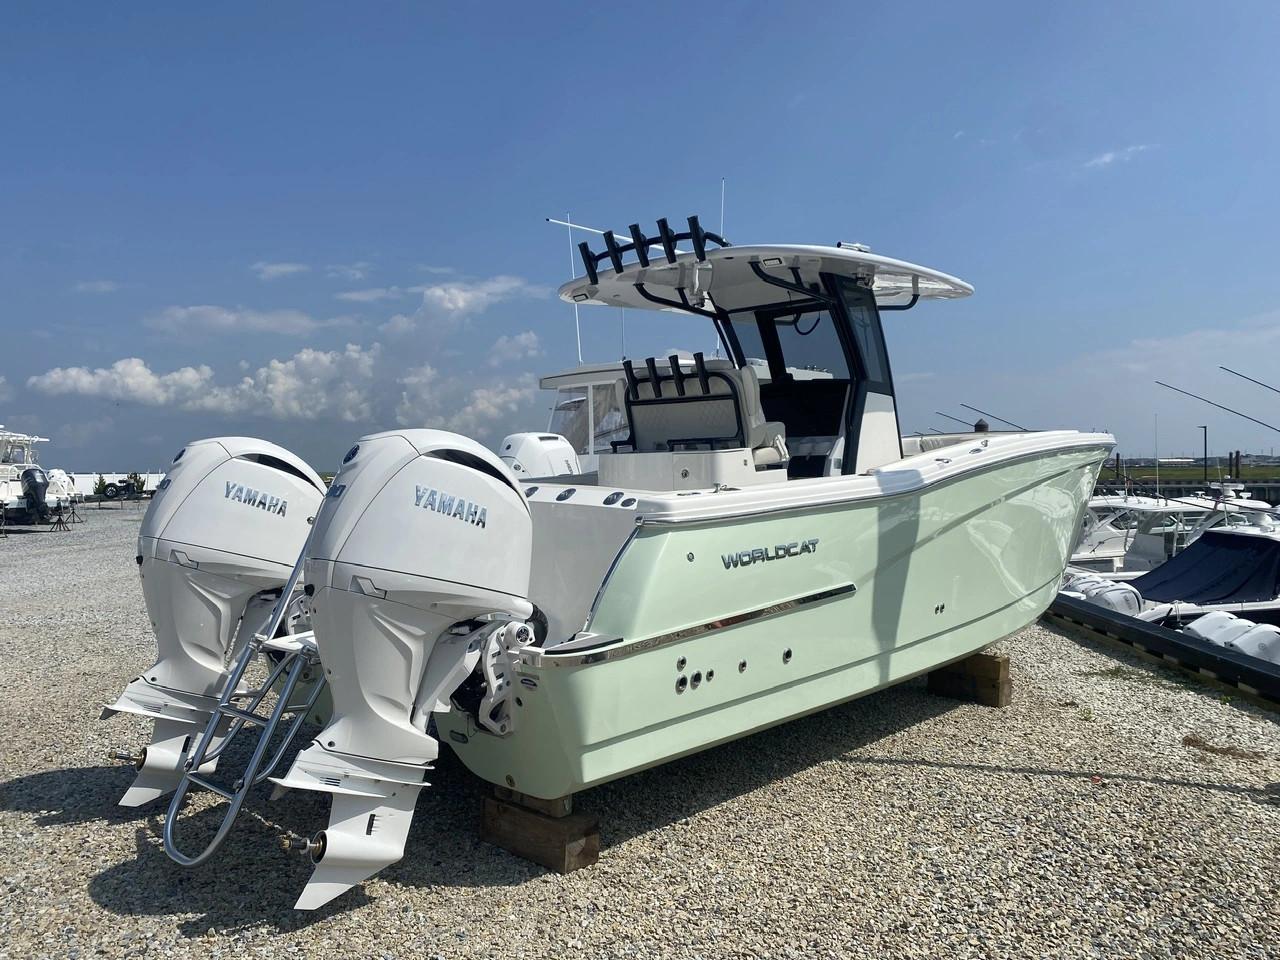 World Cat 400CC-X: 2022 Boat Buyers Guide